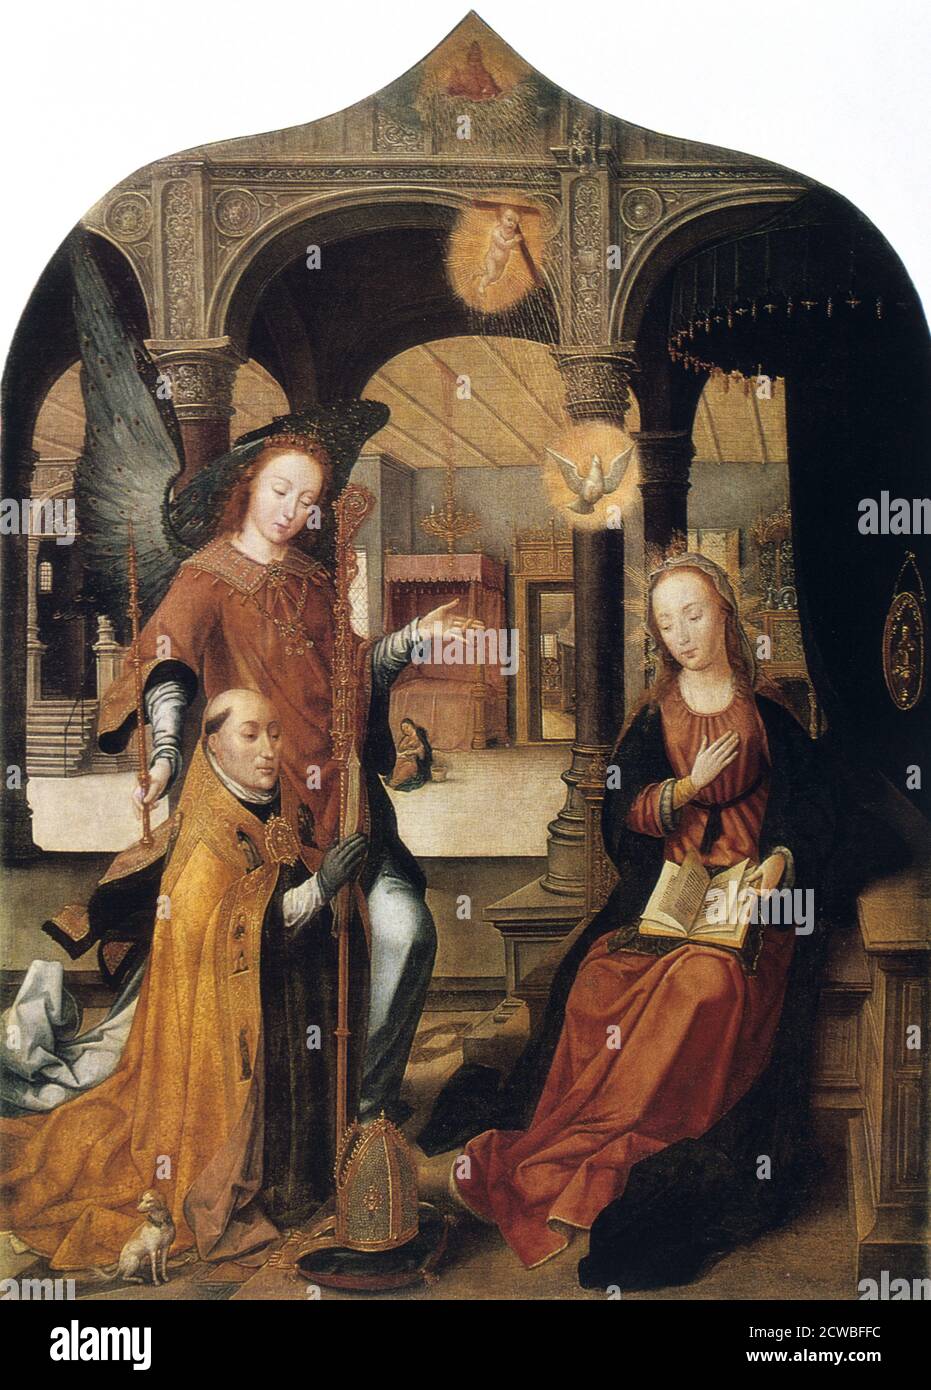 Annunciation', 1516-1517 by Jean Bellegambe. From the Hermitage Museum, St Petersburg, Russia. Stock Photo